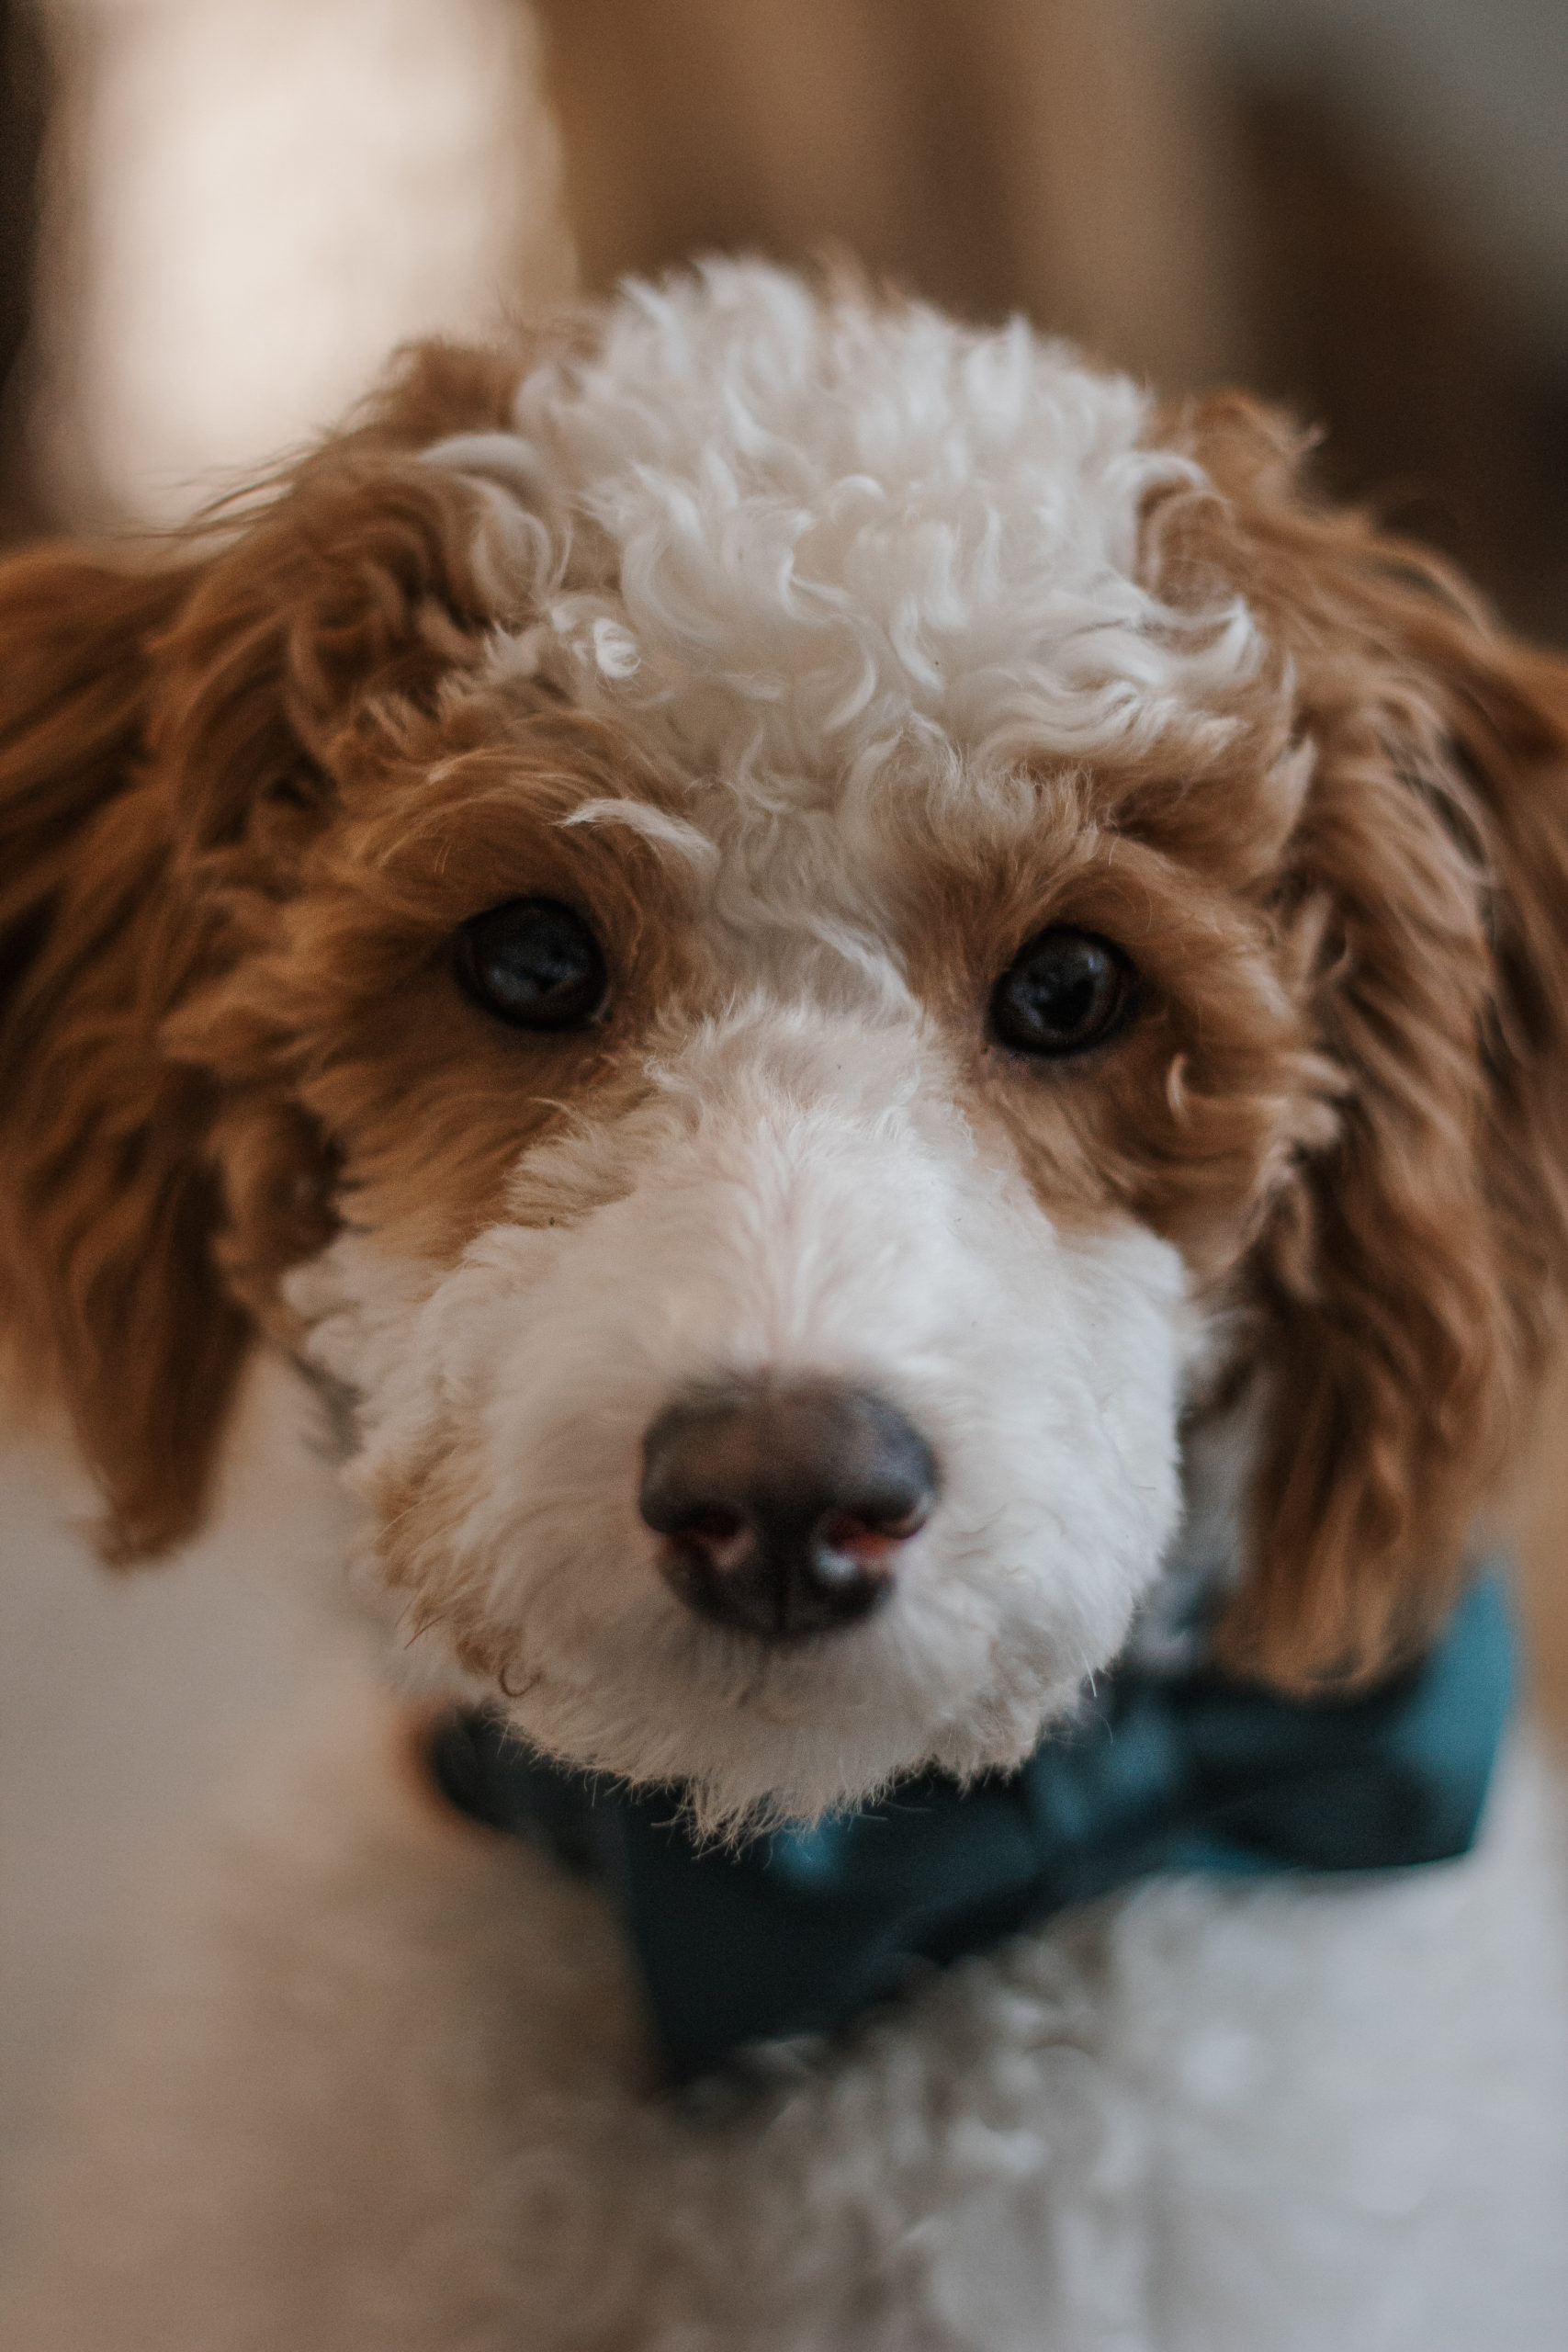 This is our other sweet pup, Luca. He is also a mini goldendoodle! 